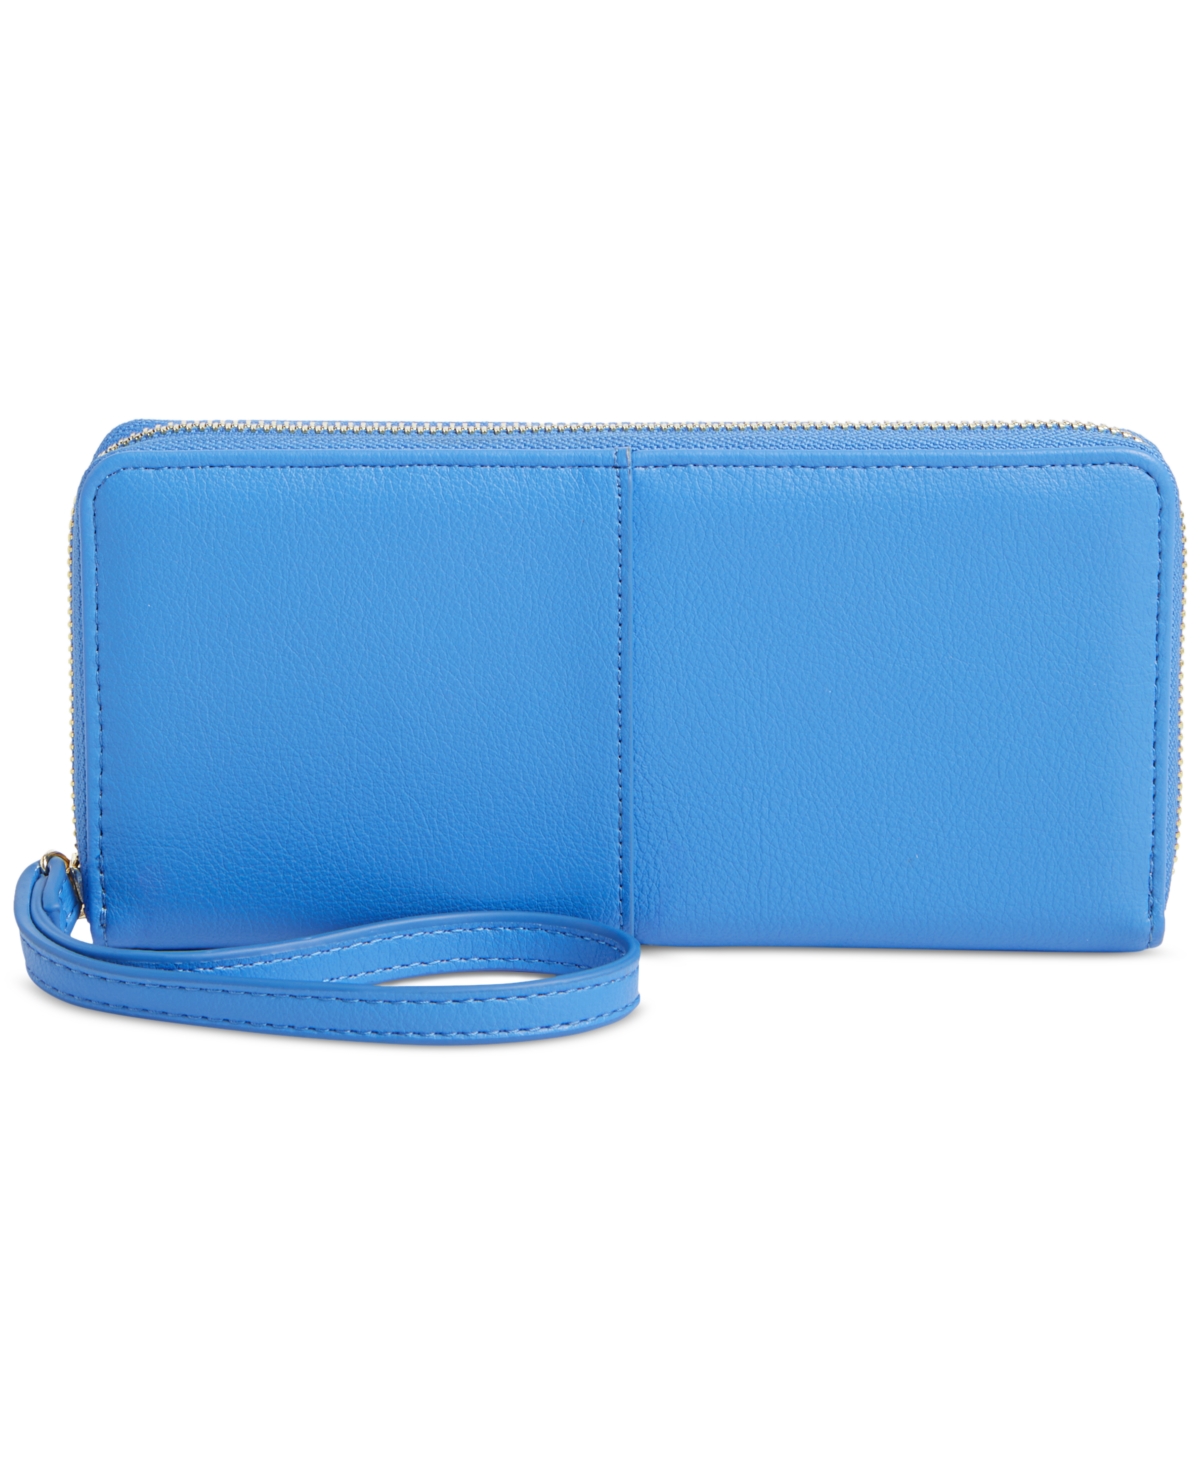 Angii Zip-Around Wallet, Created for Macy's - Pink Lilac